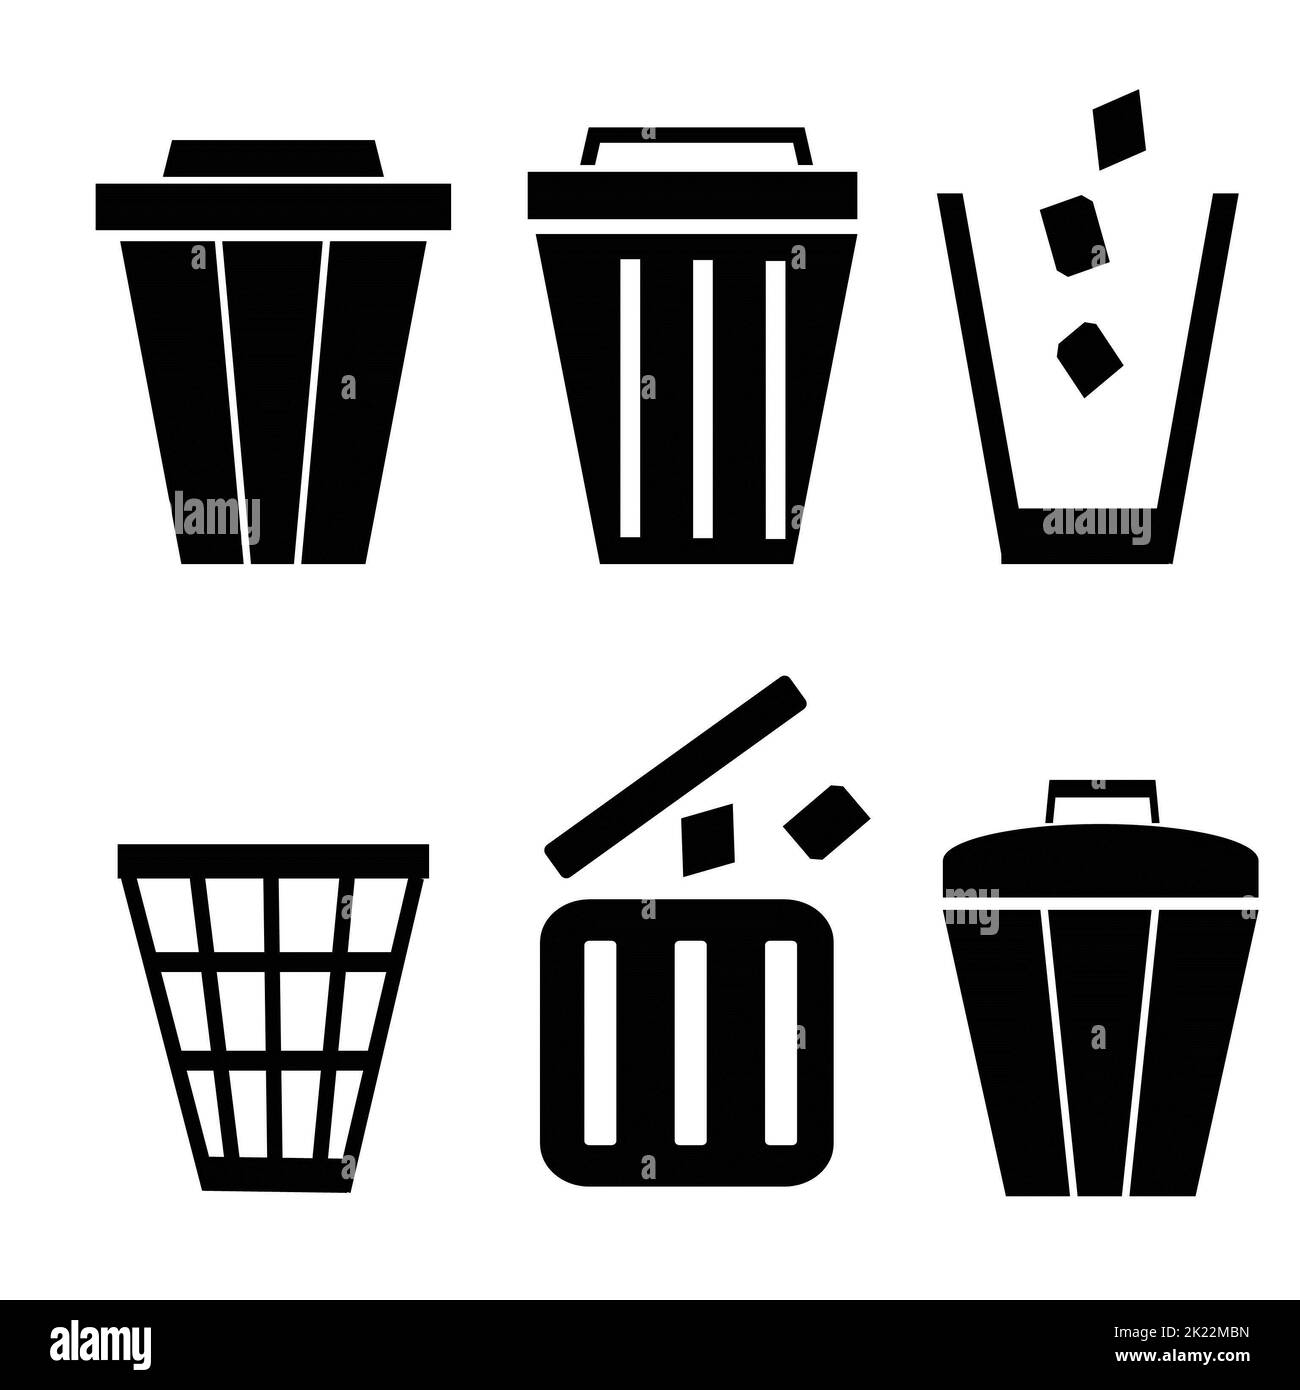 trash can vector design for graphic design needs Stock Photo